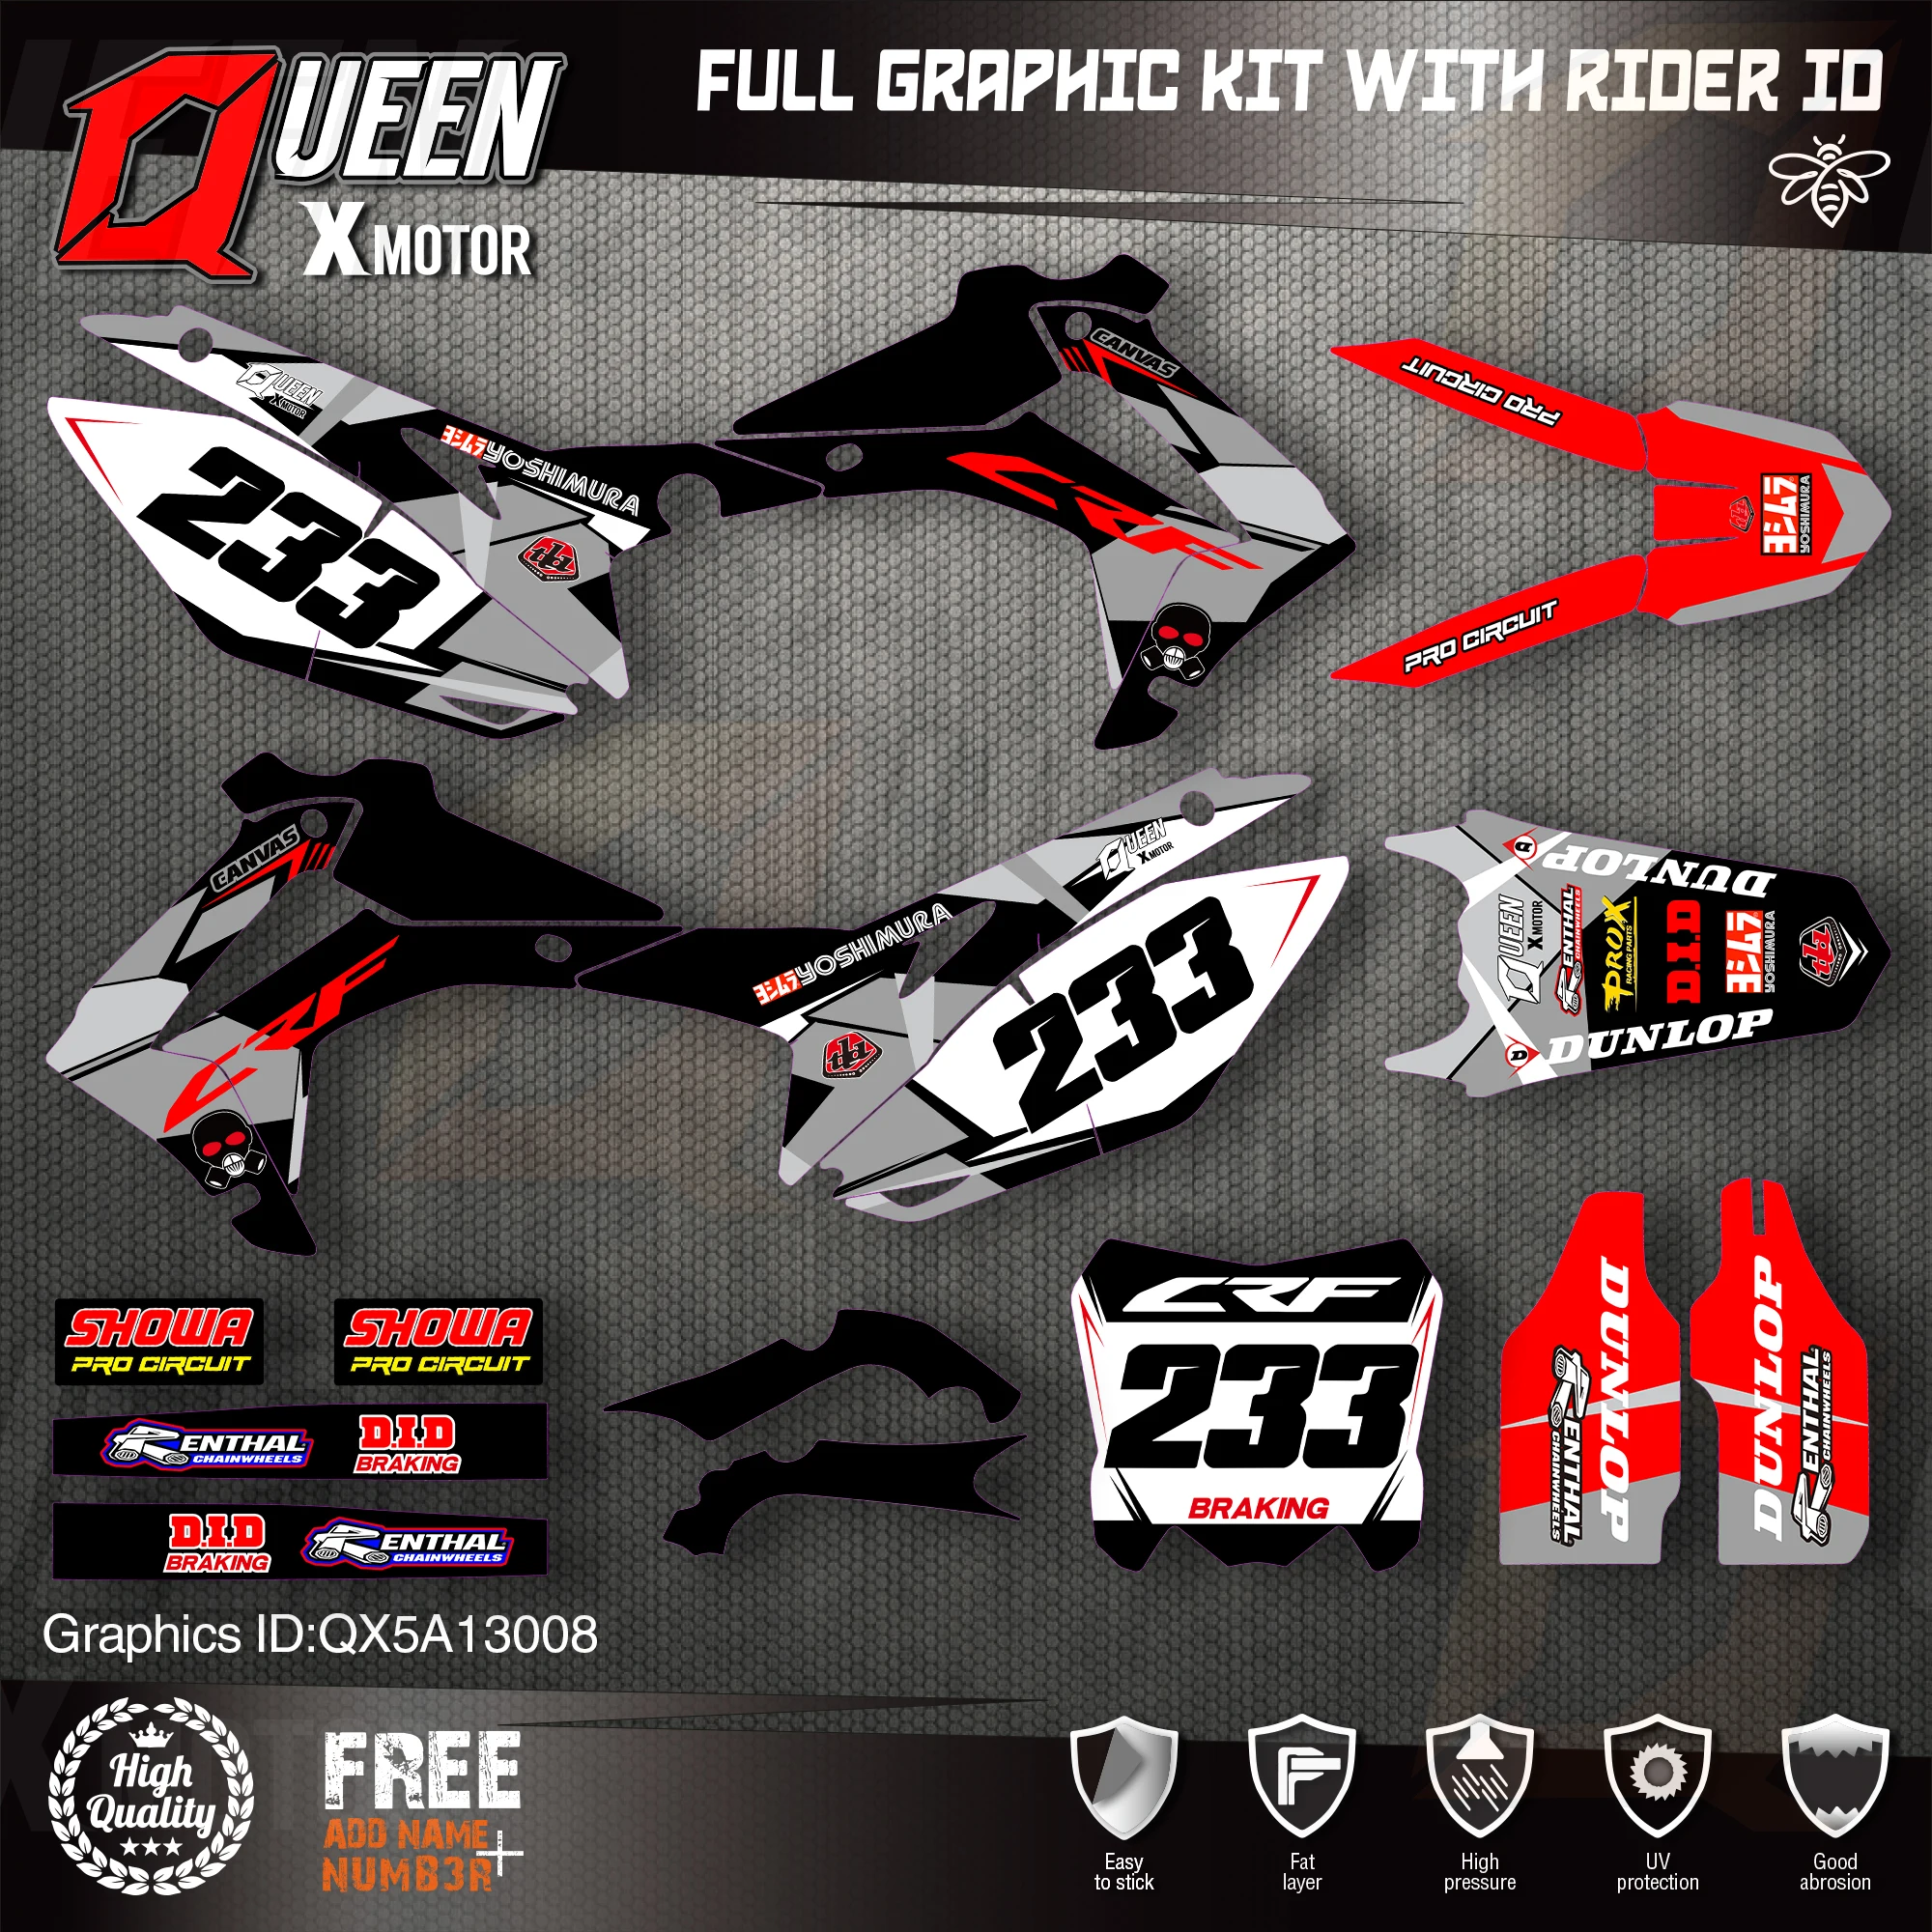 

QUEEN X MOTOR Custom Team Graphics Backgrounds Decals Stickers Kit For HONDA 2014-2017 CRF250R 2013-2016 CRF450R 008